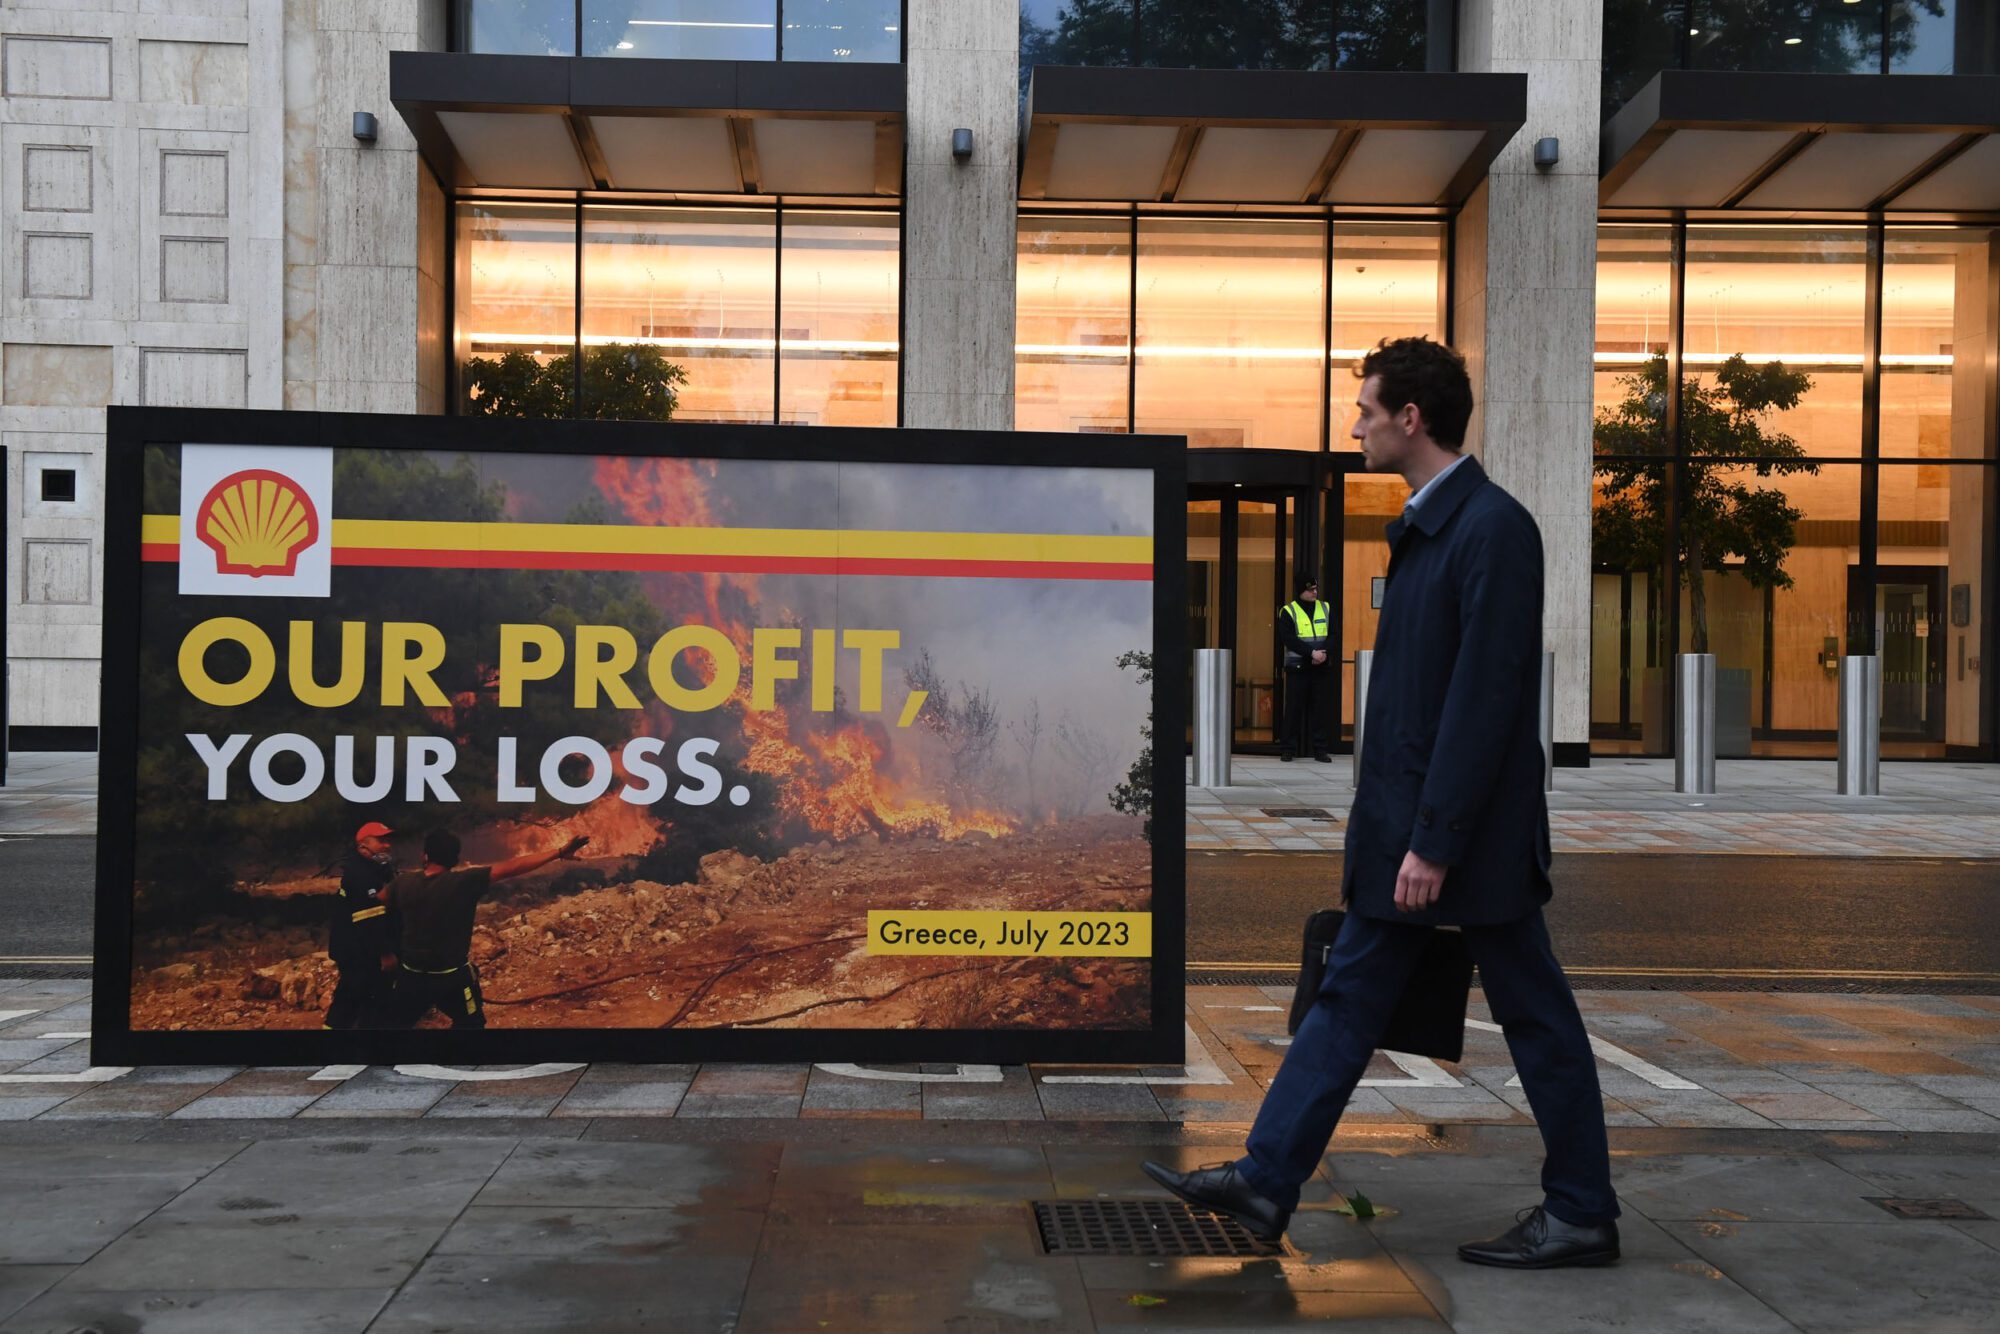 A man in a suit walks past a large billboard with a Shell logo in front of a fire scene, reading "Our profit, Your loss", in front of the entrance to a large office building with a double-height reception glowing with lights.